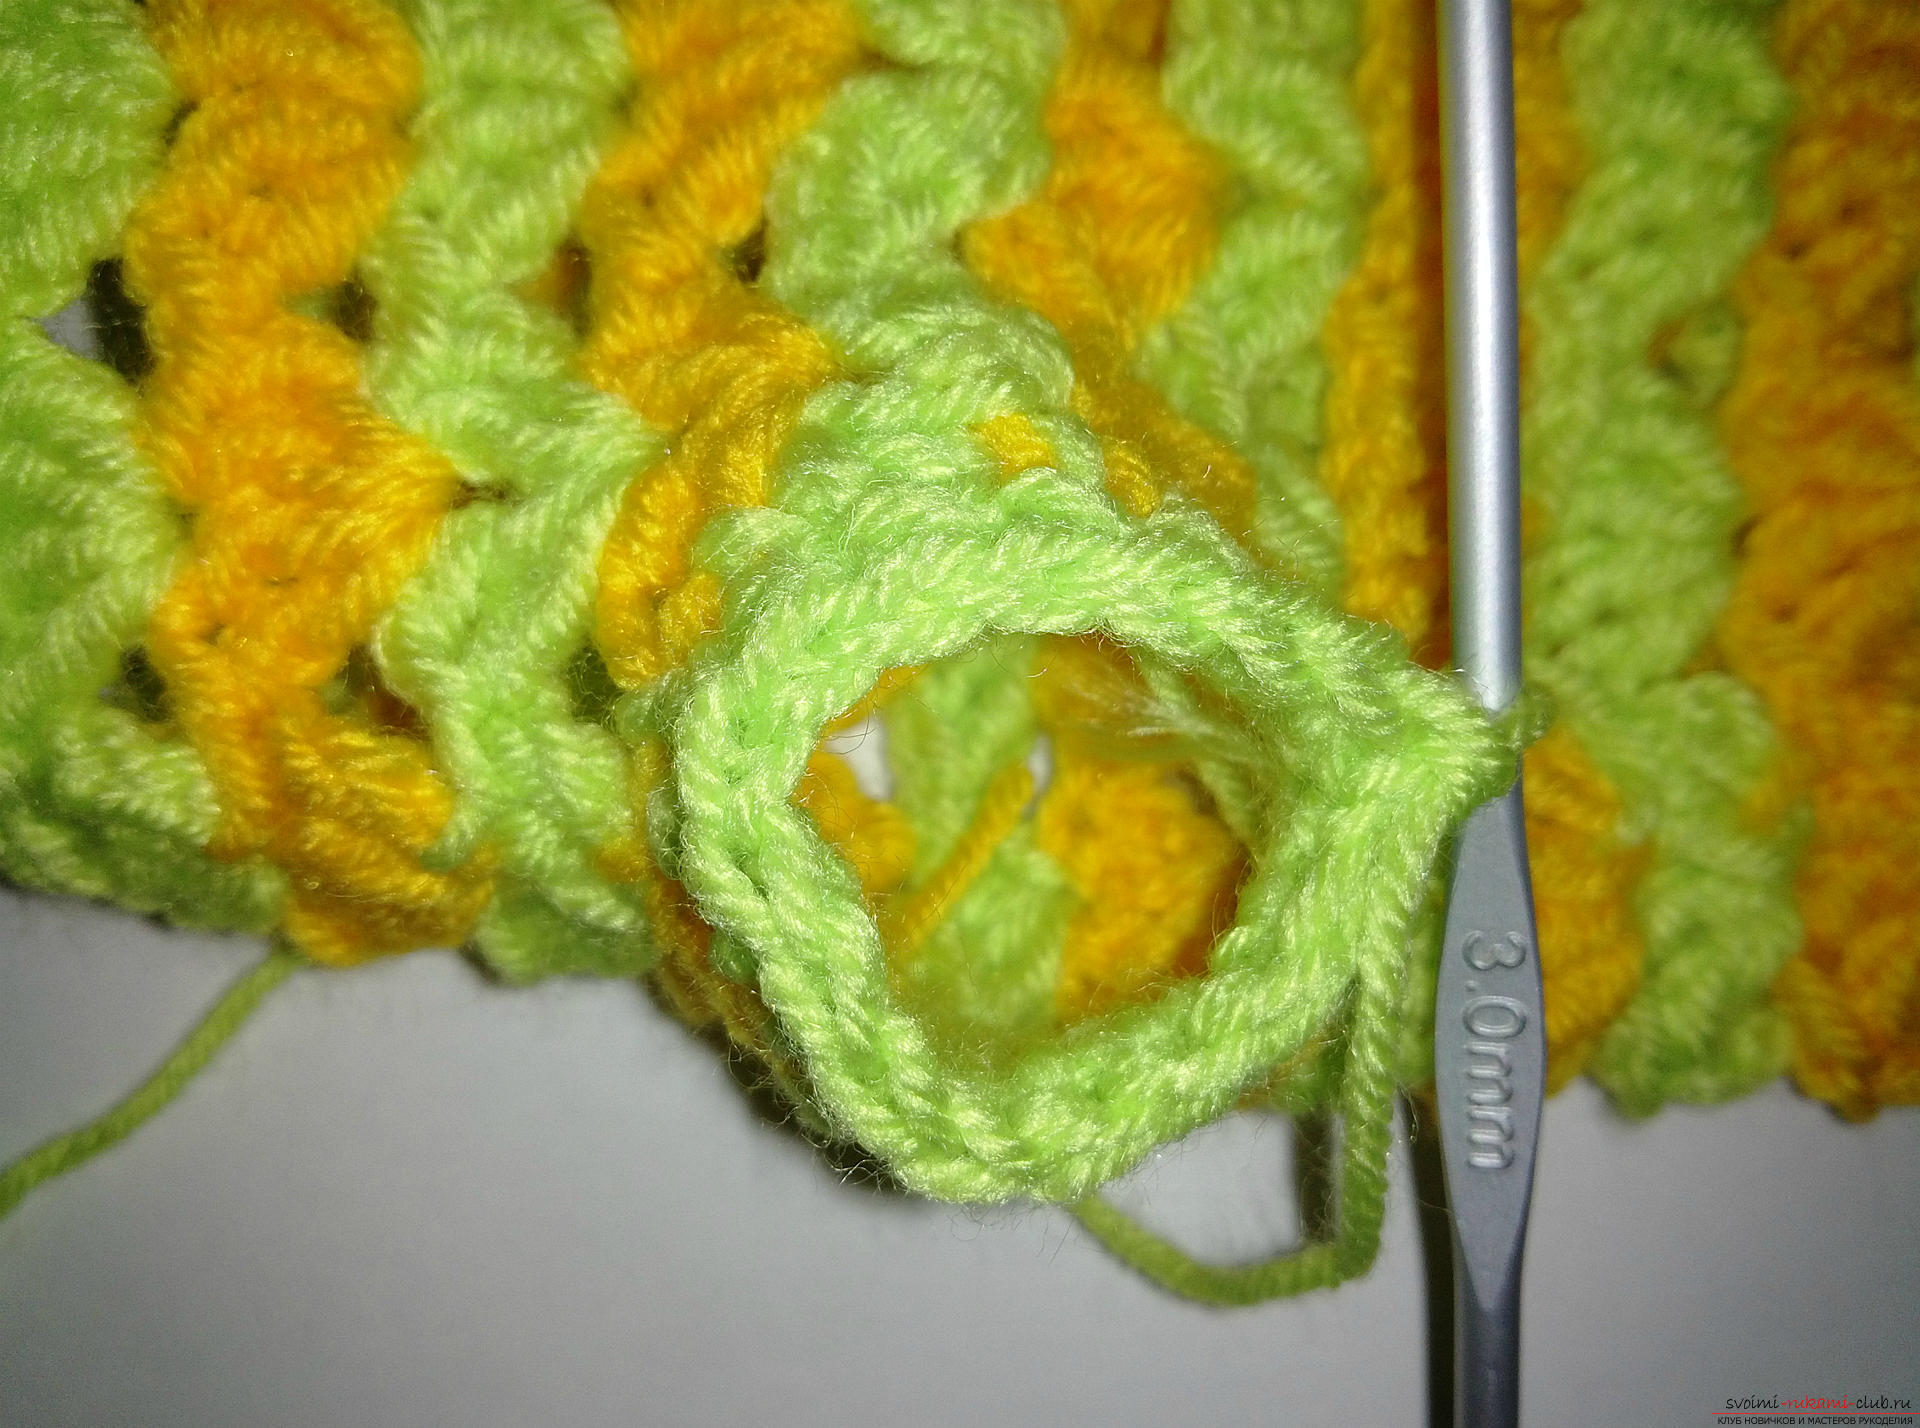 A master class with a photo and a description of the process will teach how to tie fishnet mitts crochet. Photo №13